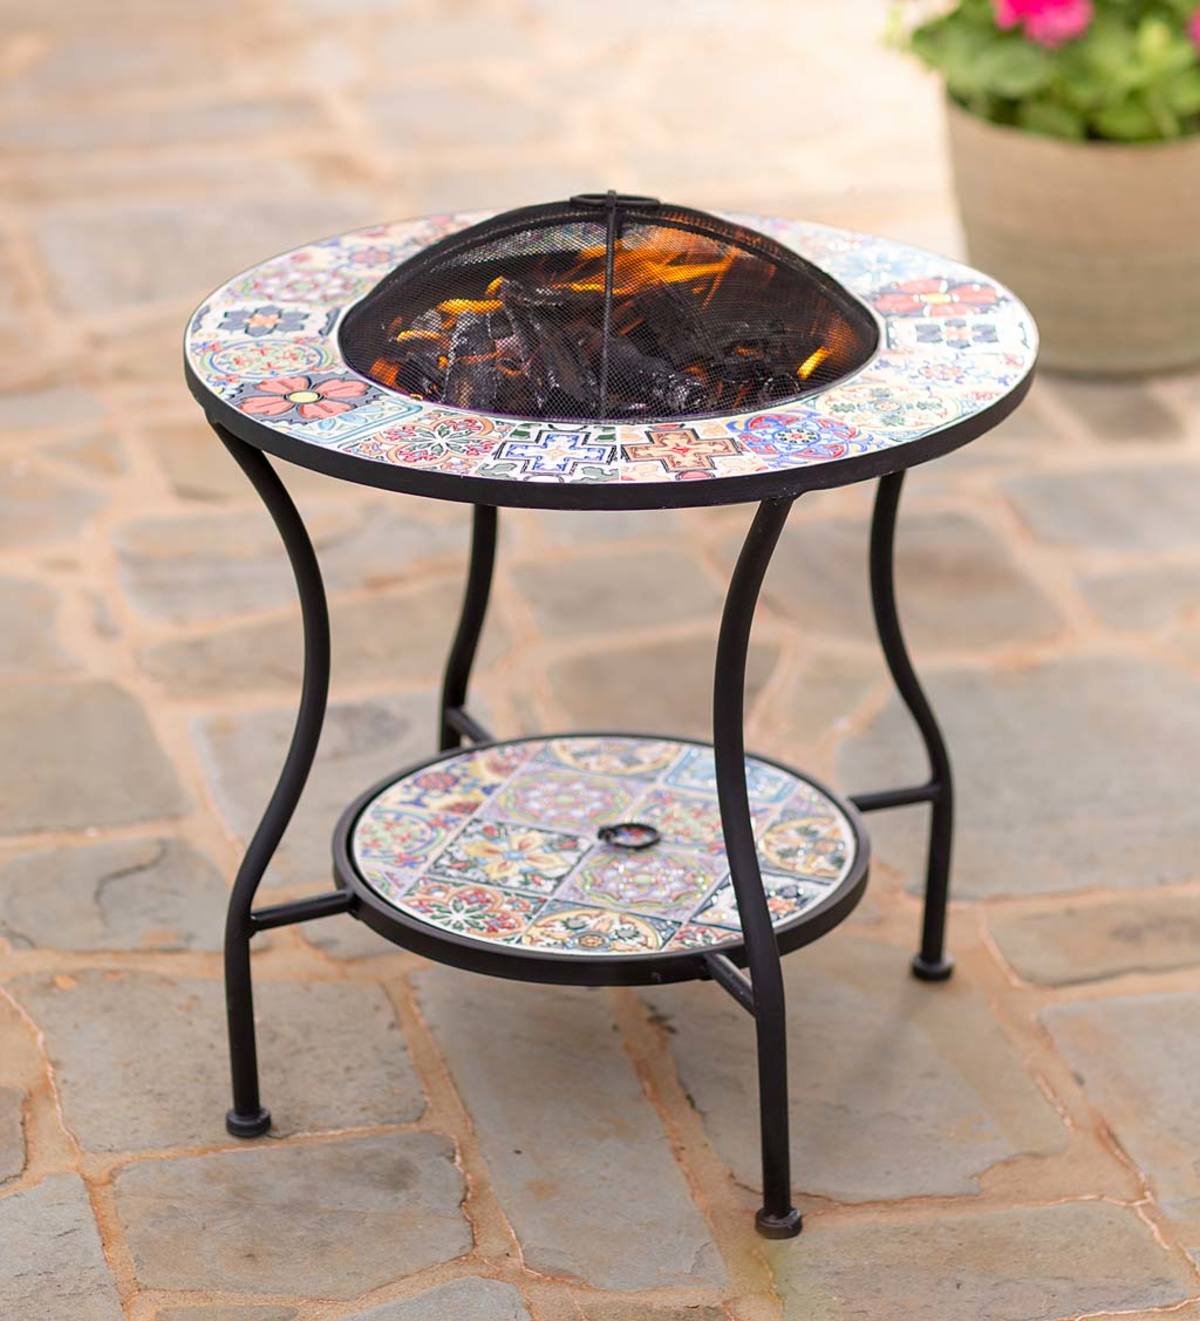 Mosaic Tile Convertible Fire Pit Side, Mosaic Fire Pit Cover